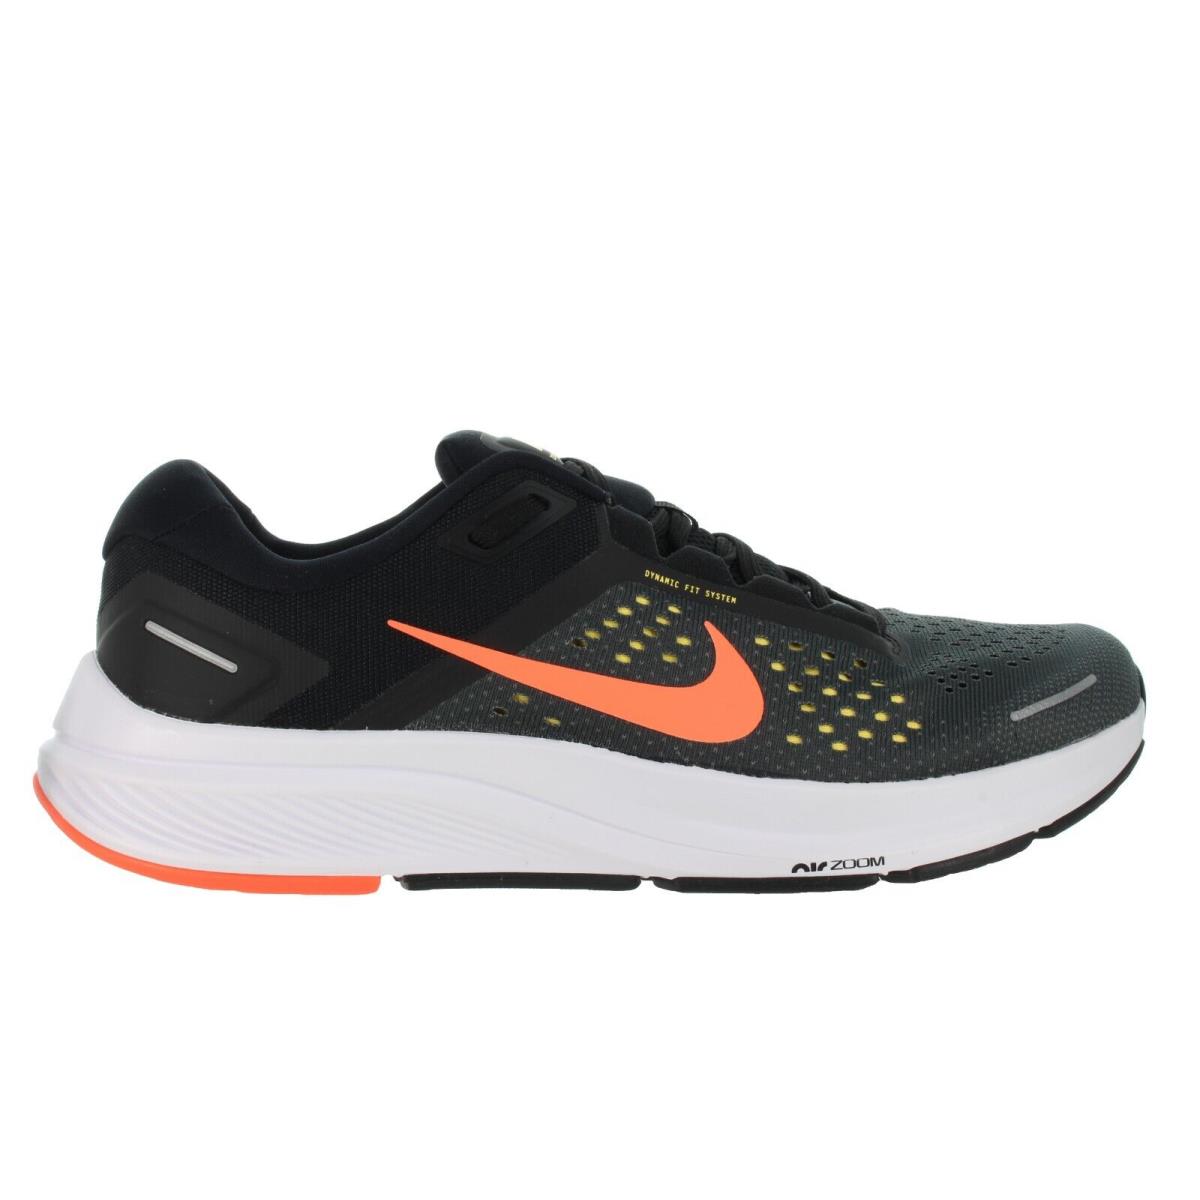 Nike Men`s Air Zoom Structure 23 Anthracite/mango Running Shoes - Anthracite, Bright Mango, Black